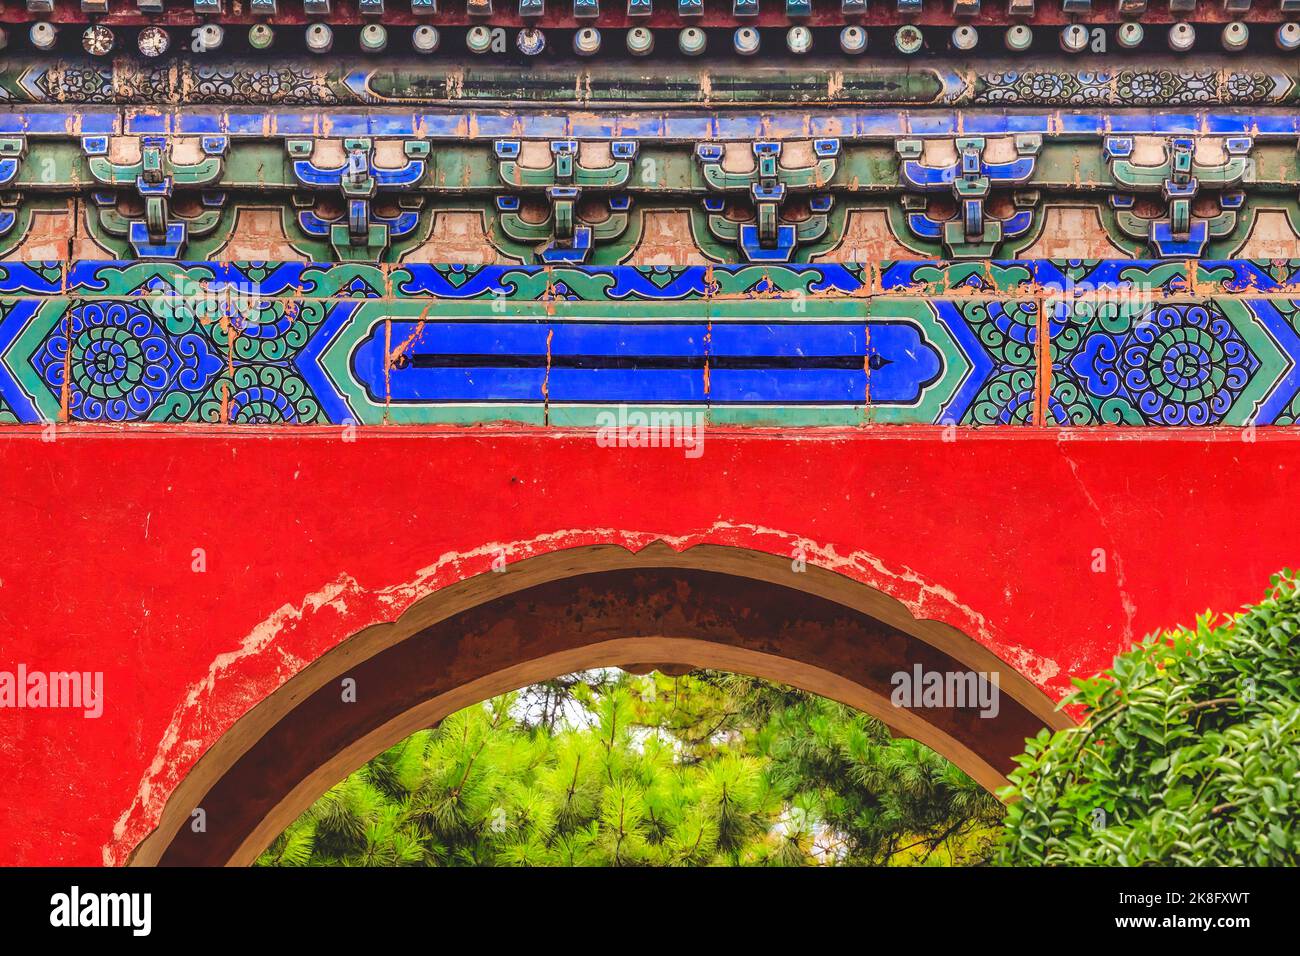 Red Ornate Gate Temple of Sun City Park Beijing China Green Trees Built 1530 in Ming Dynasty Stock Photo